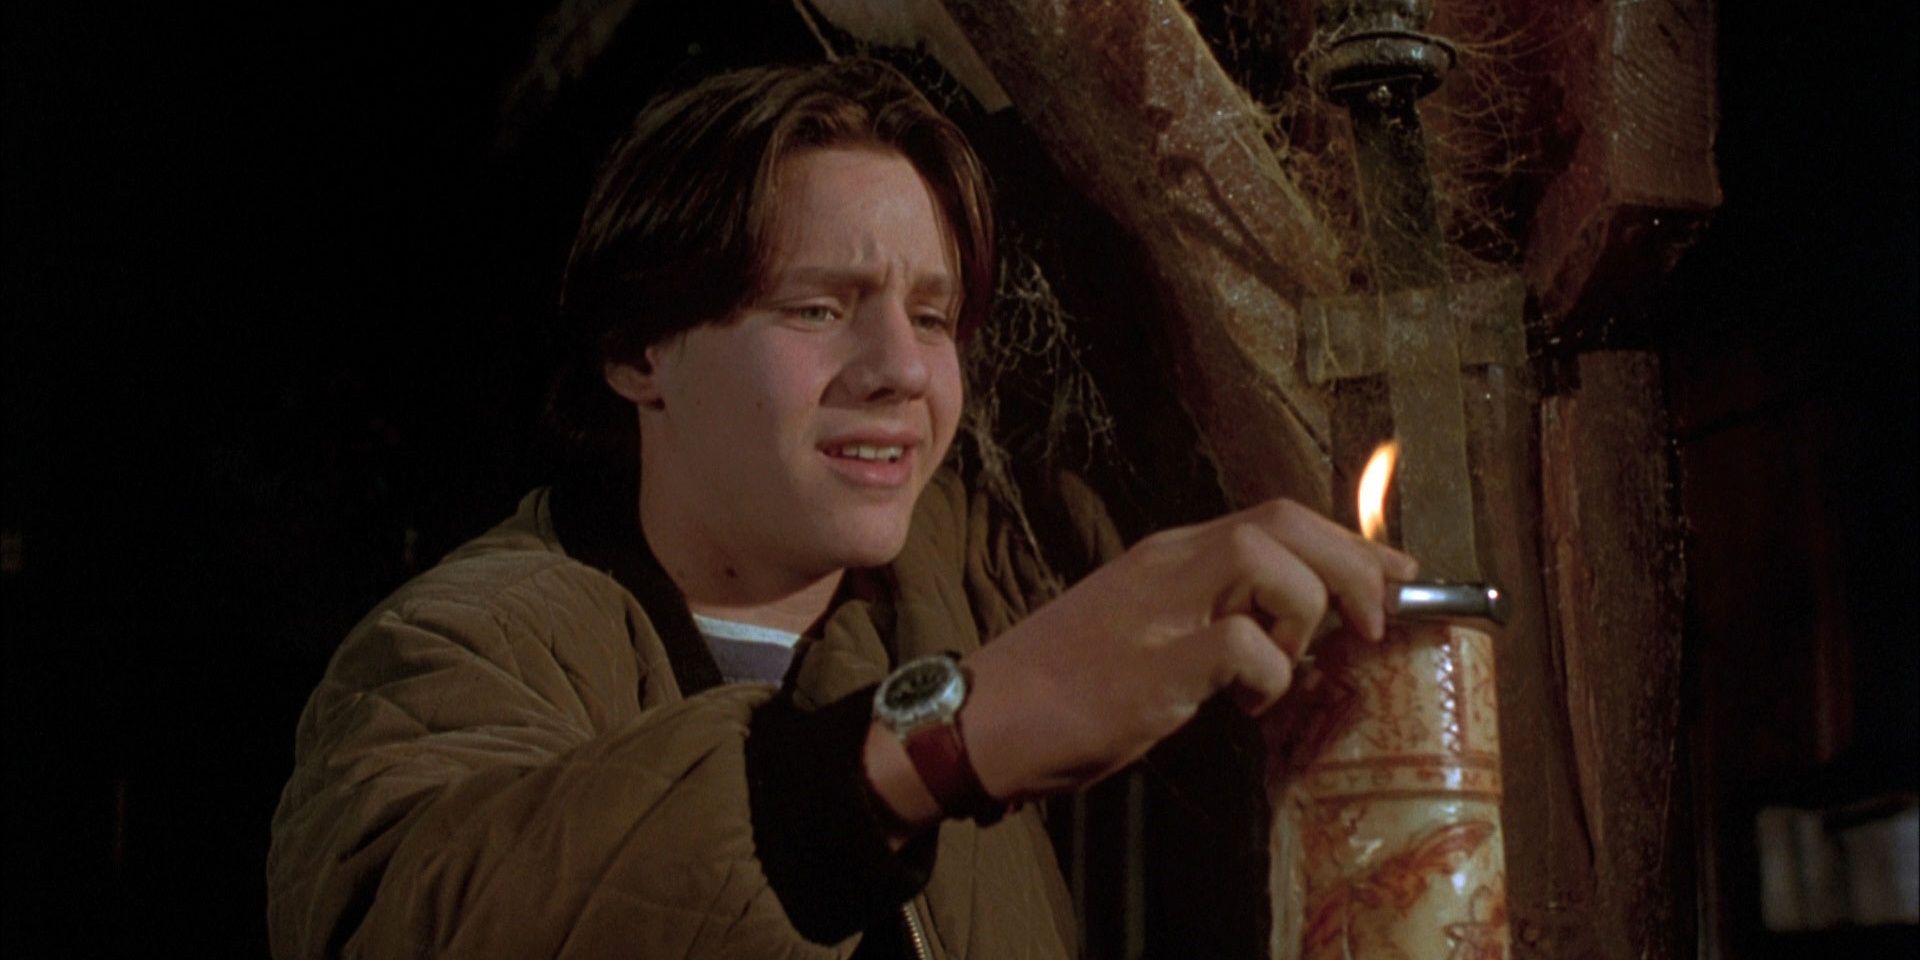 Max lighting the Black Flame Candle in Hocus Pocus